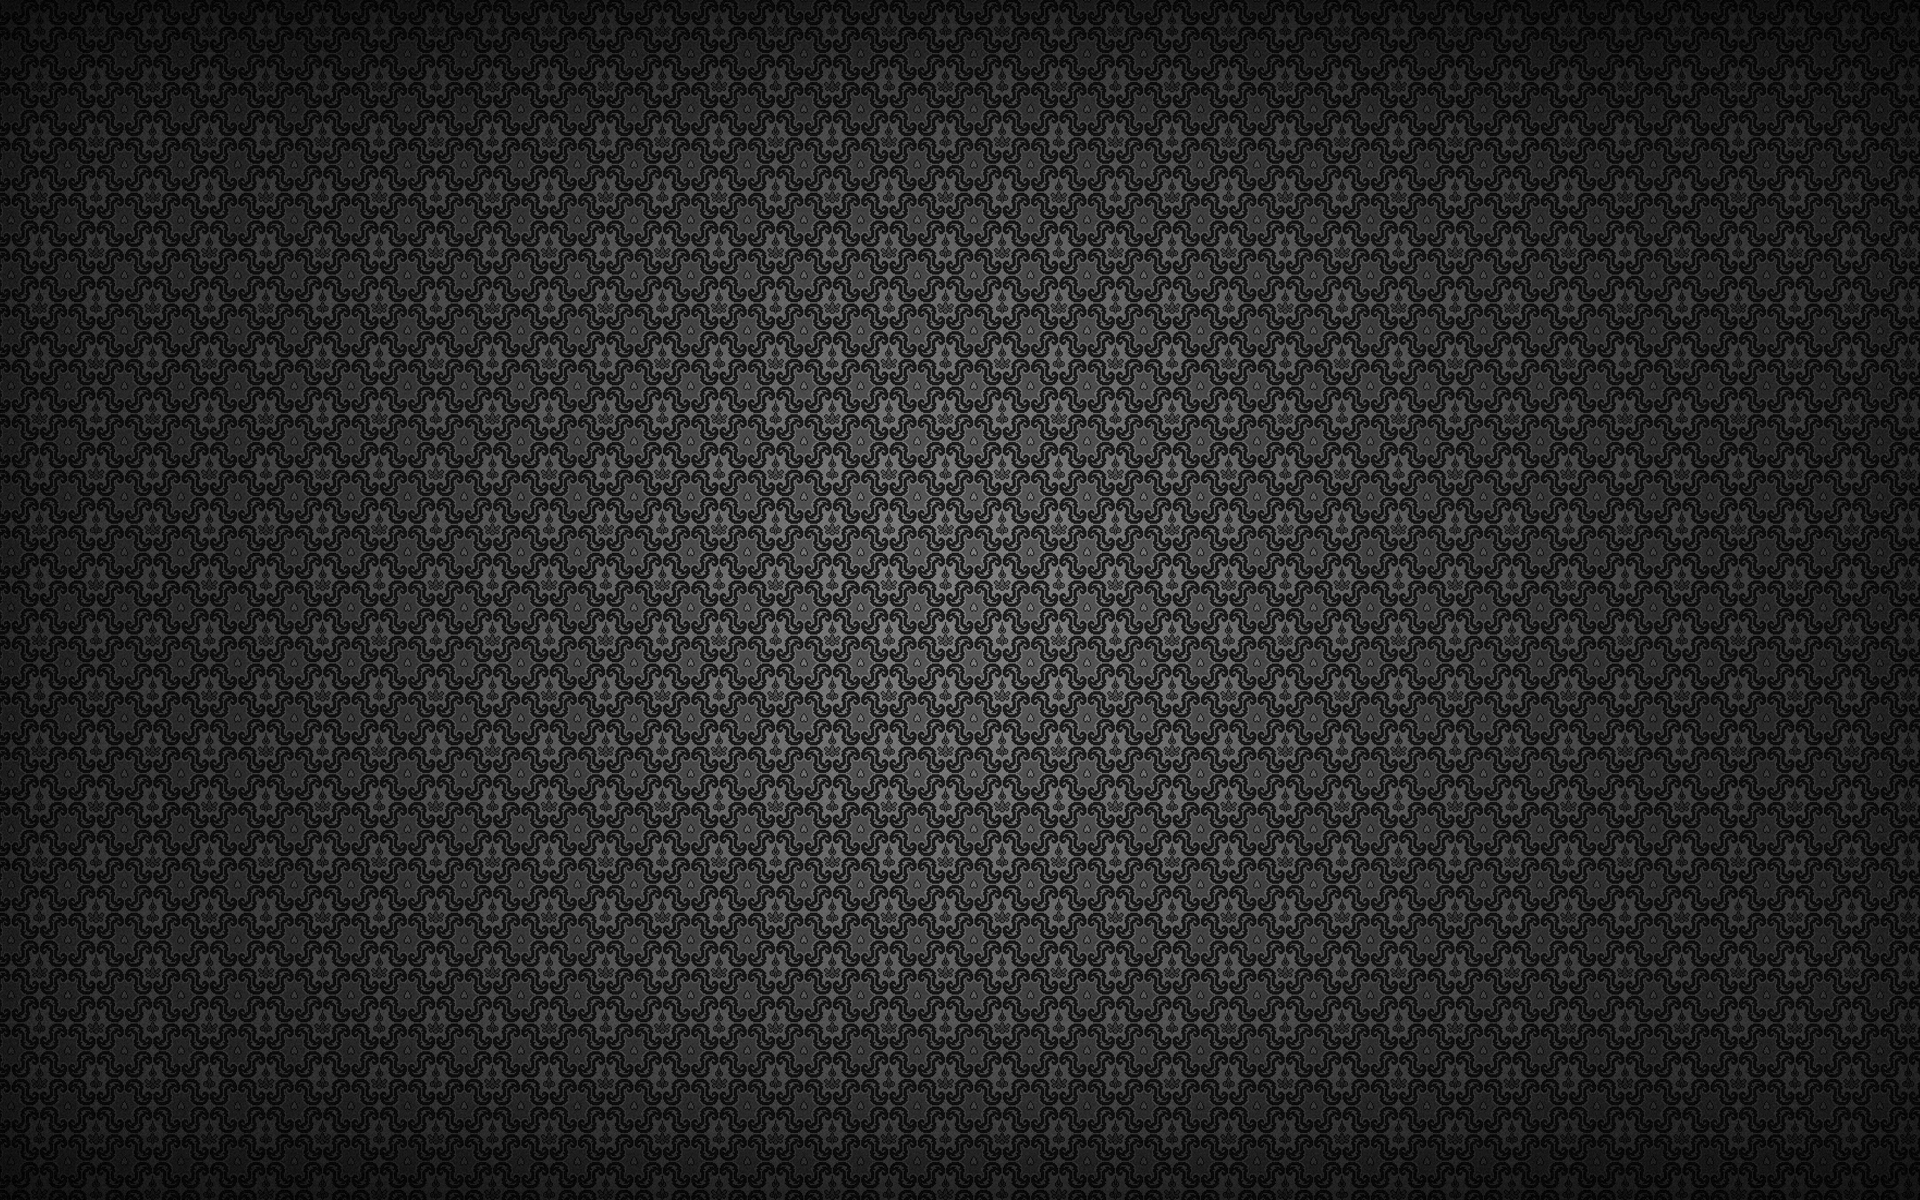 Textures Image Backgrounds For Powerpoint Templates Ppt Backgrounds